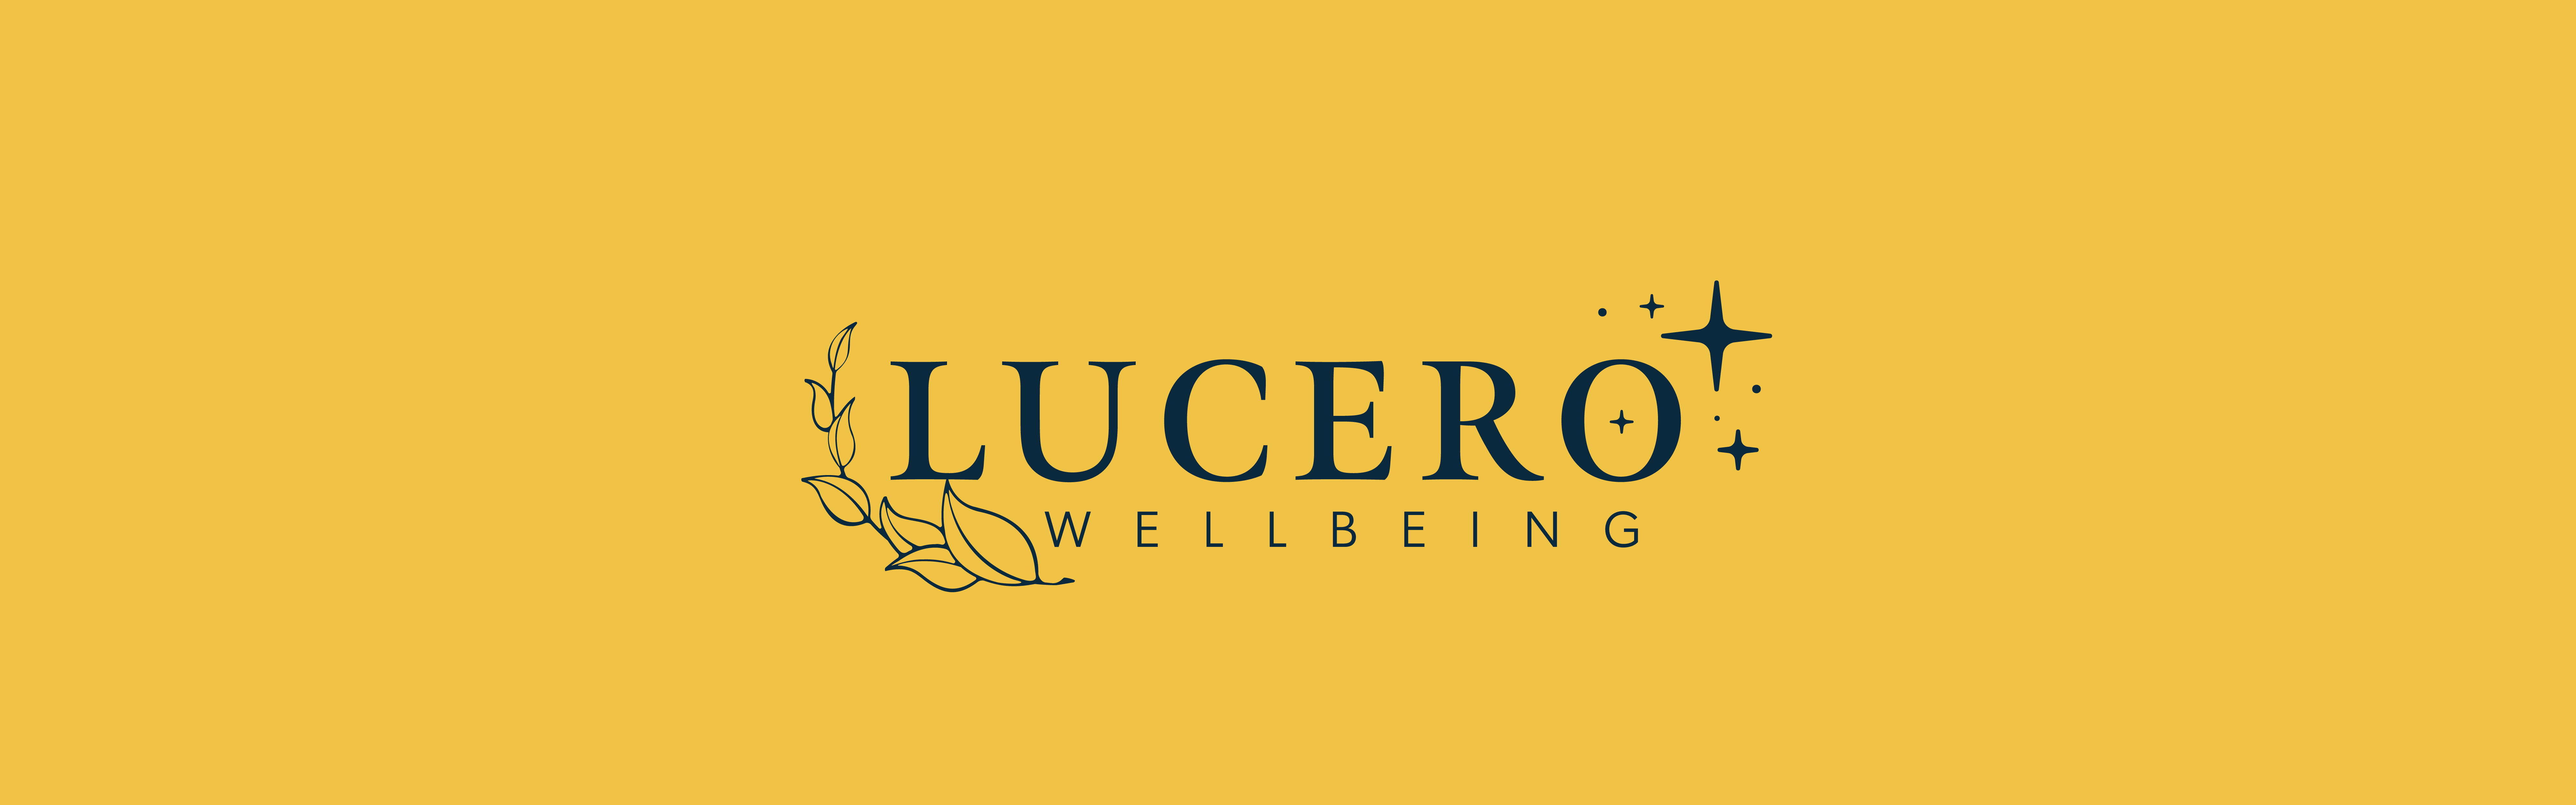 The image displays a logo with the word "Lucero" in capitalized, elegant black lettering, followed by a smaller "Wellbeing" underneath it. On the left side of the.